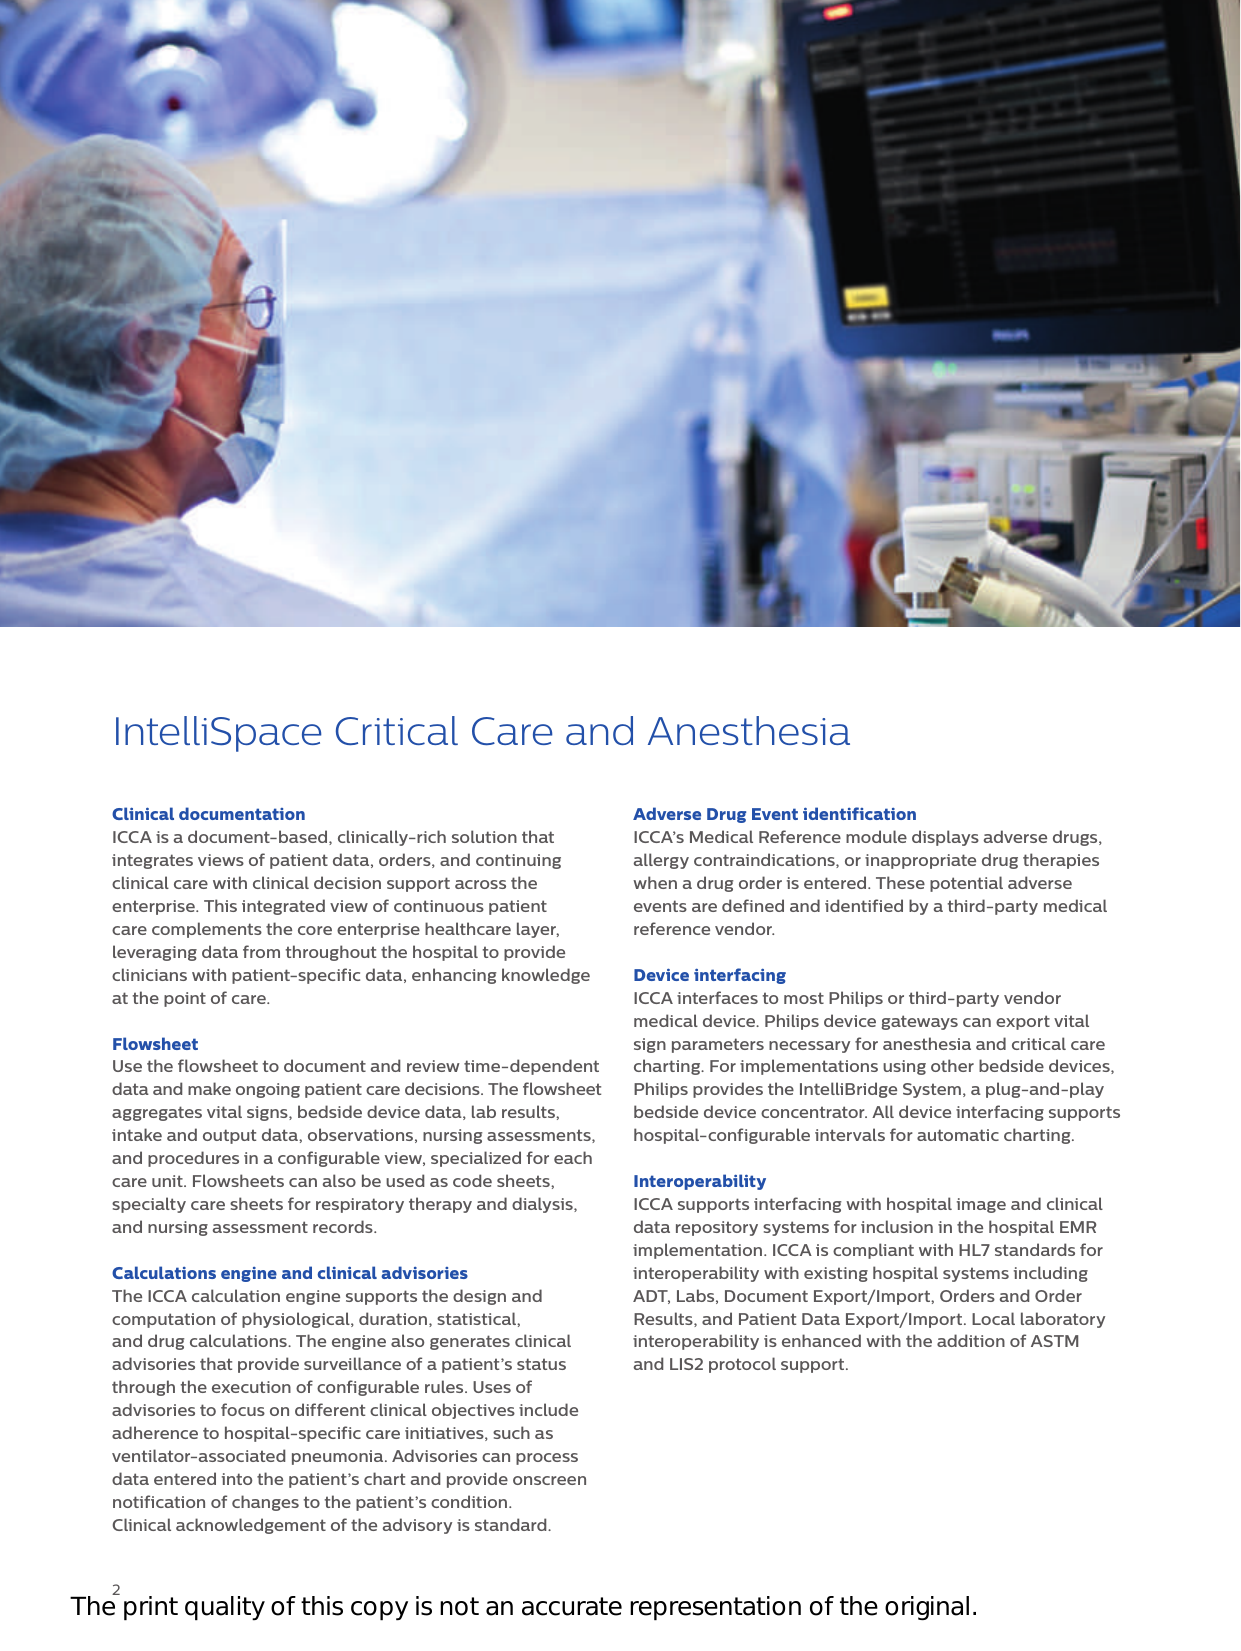 Page 2 of 4 - Philips NOCTN332 452299109771 User Manual Intelli Space Critical Care And Anesthesia ICCA Data Sheet